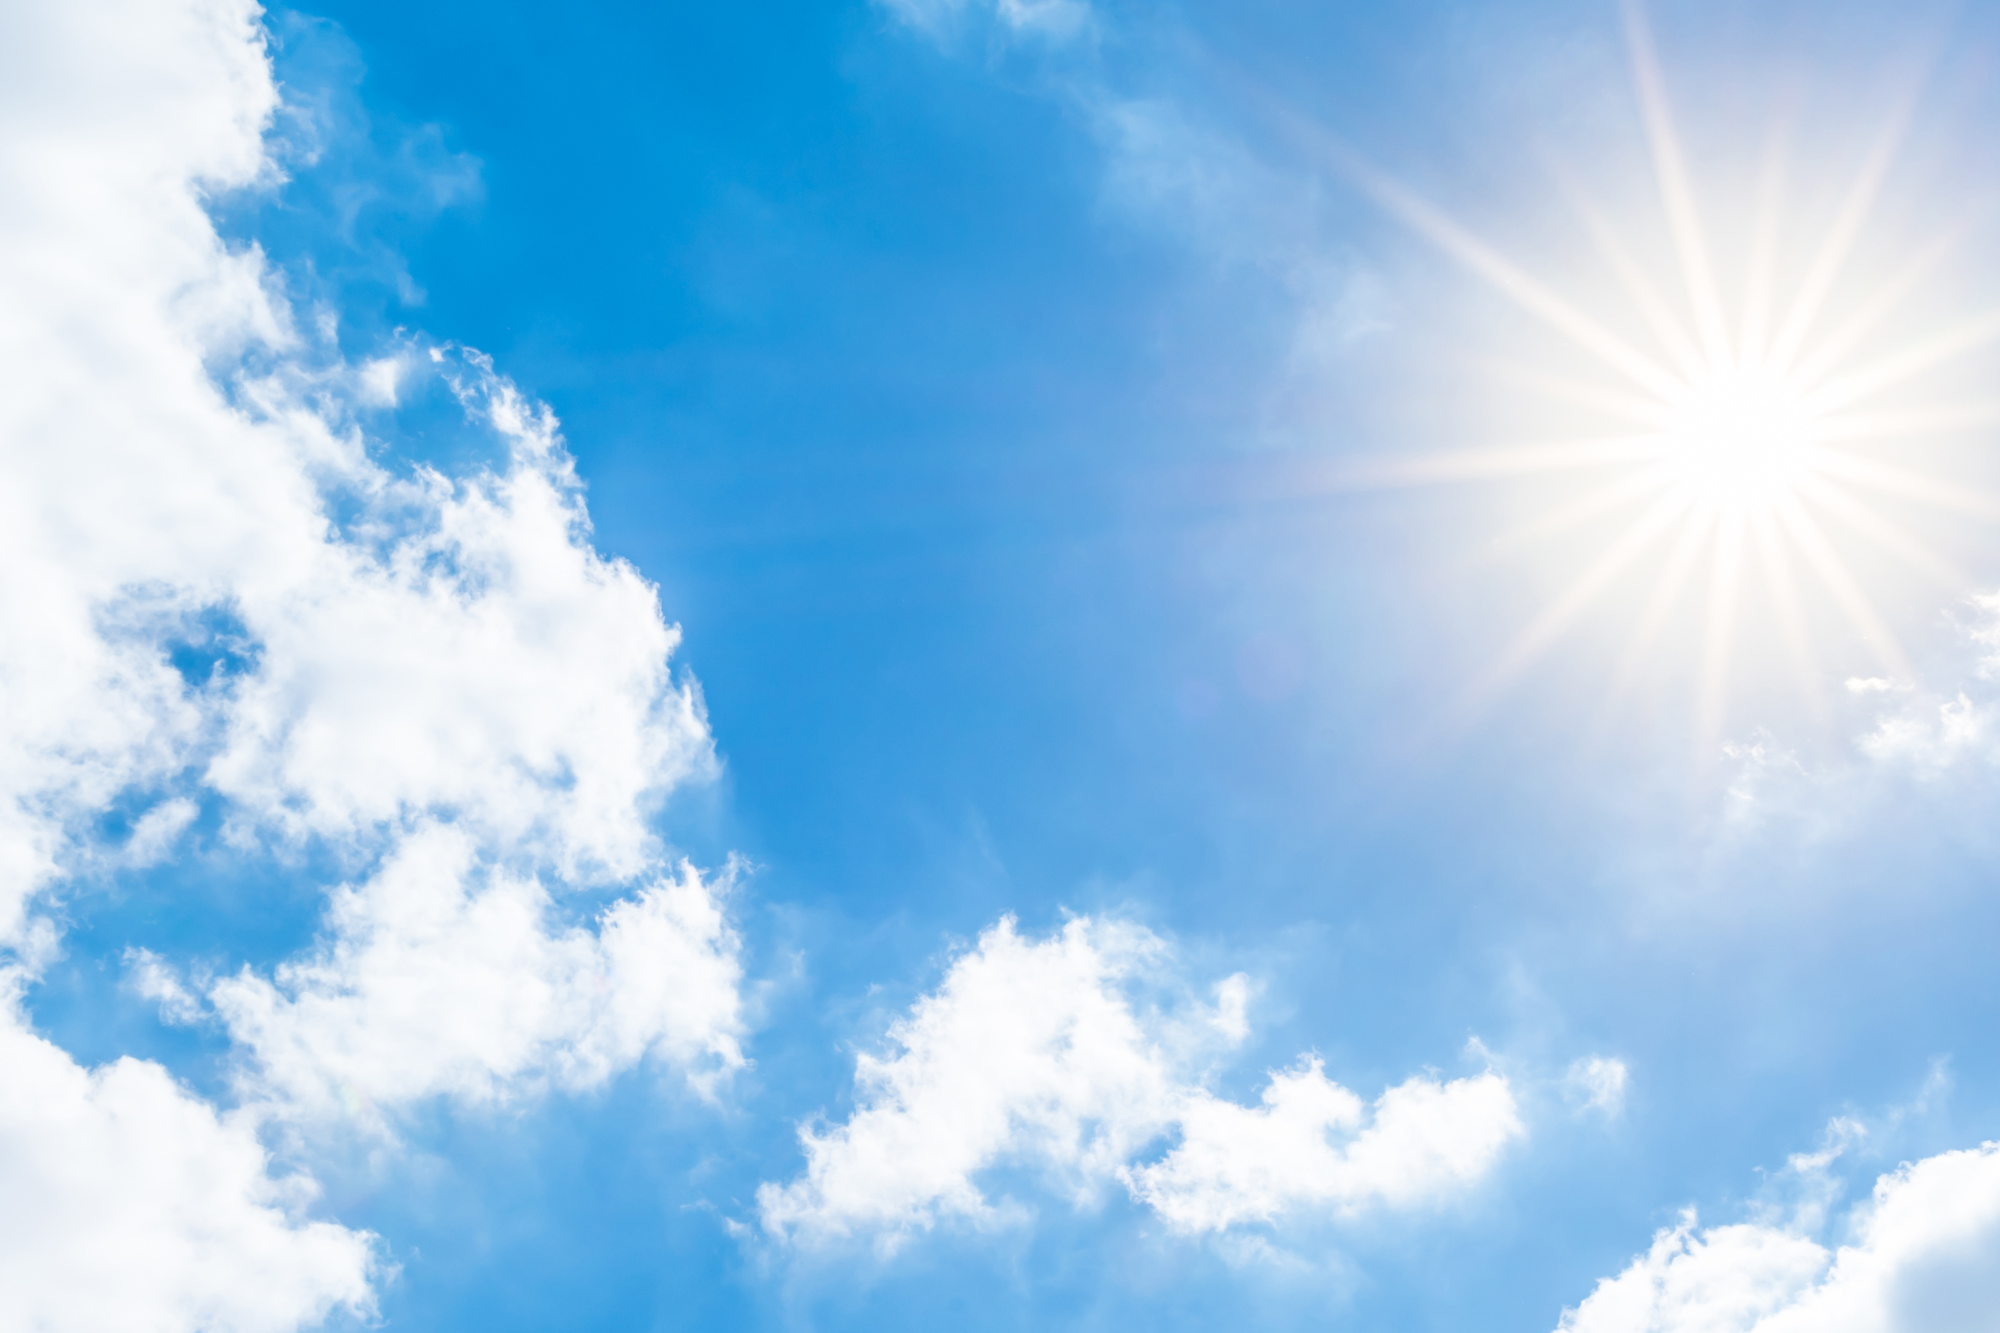 A bright blue sky with fluffy white clouds and bright sunshine symbolizes the connection between light, health, and wellness.